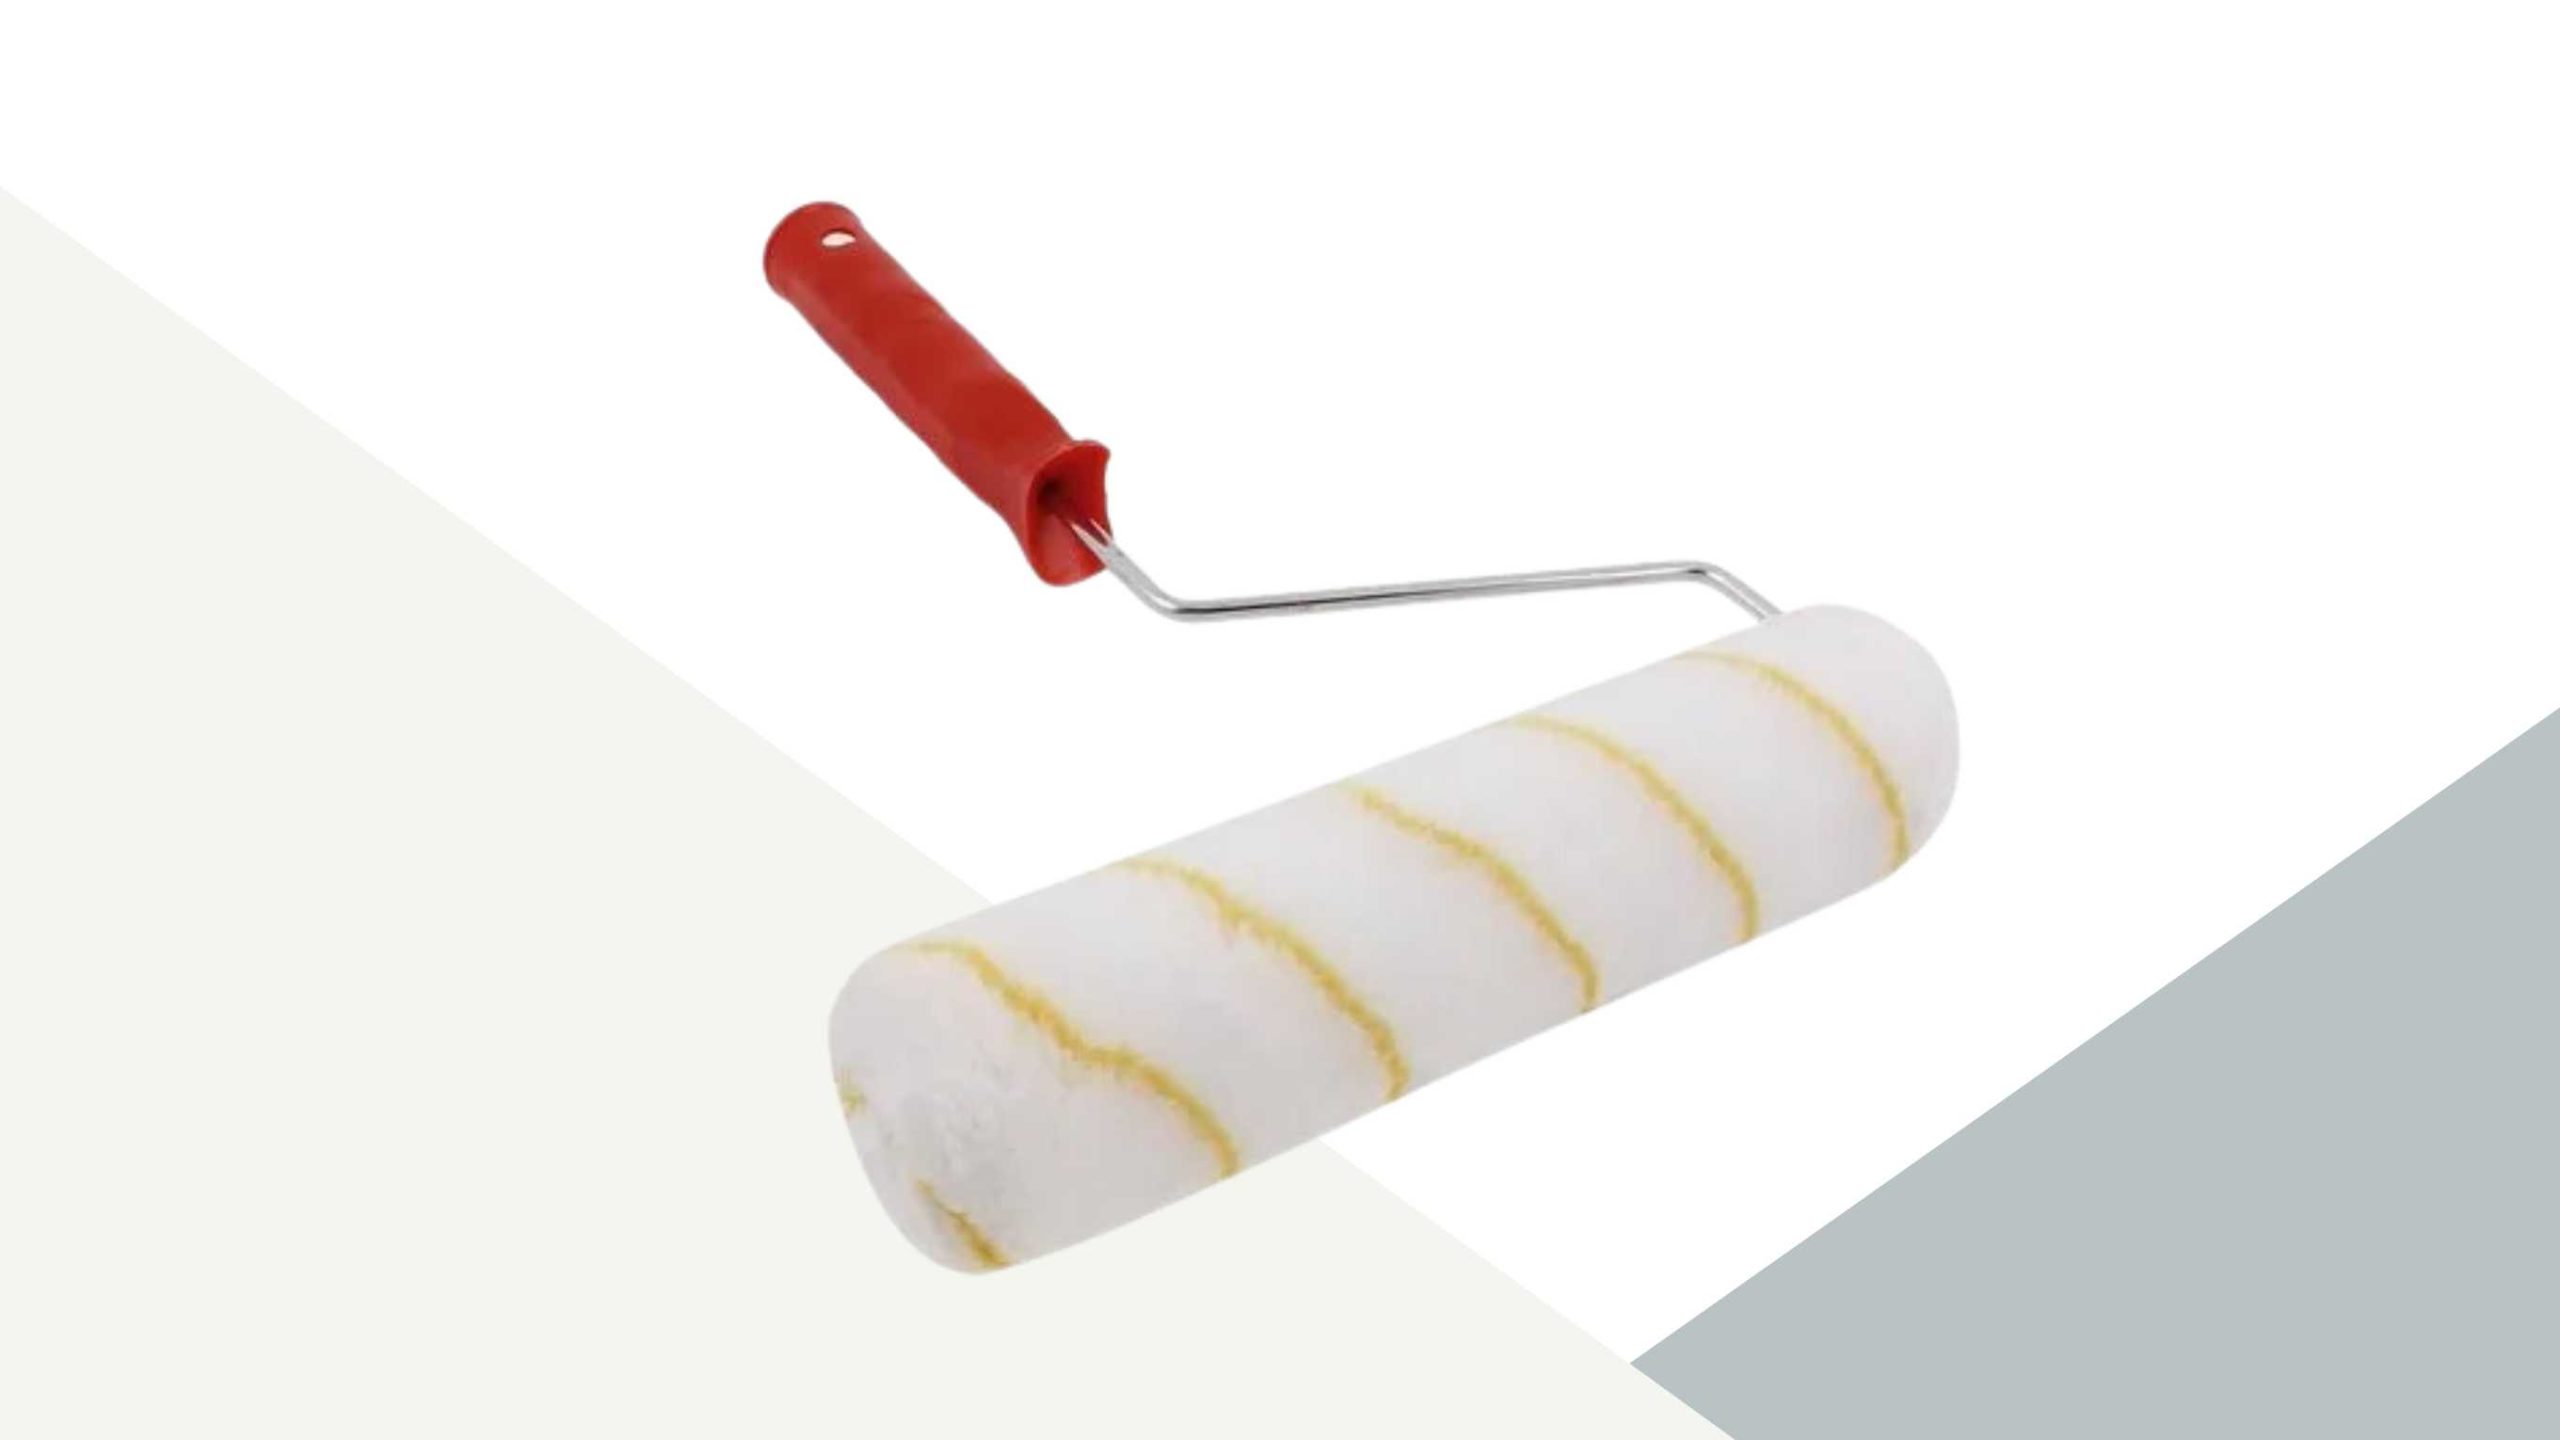 Manual Paint Roller scaled image